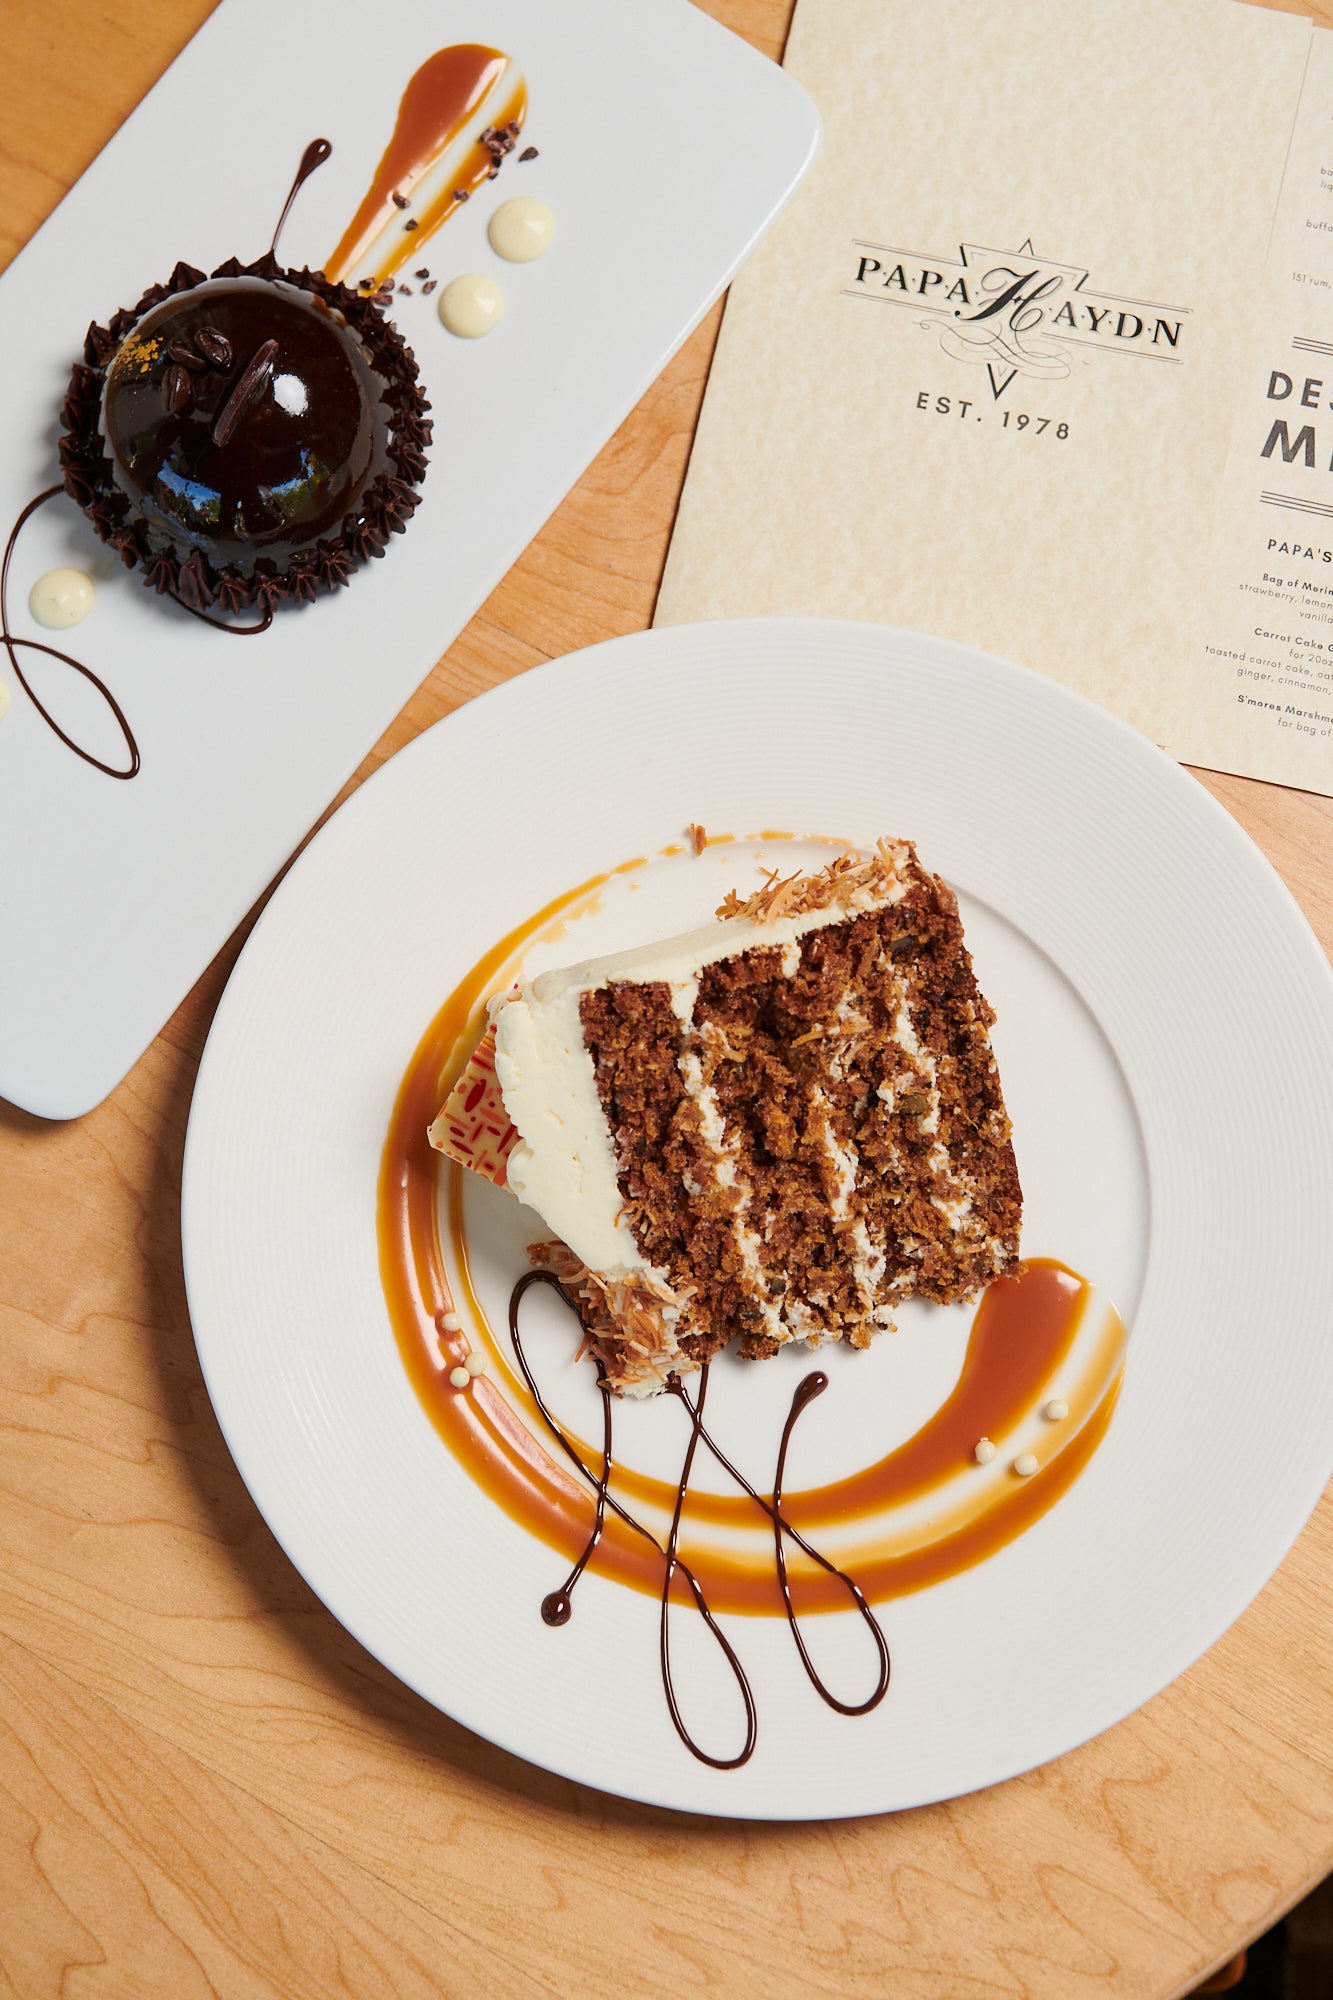 A slice of Papa Haydn's Carrot Cake and the Café au Chocolat